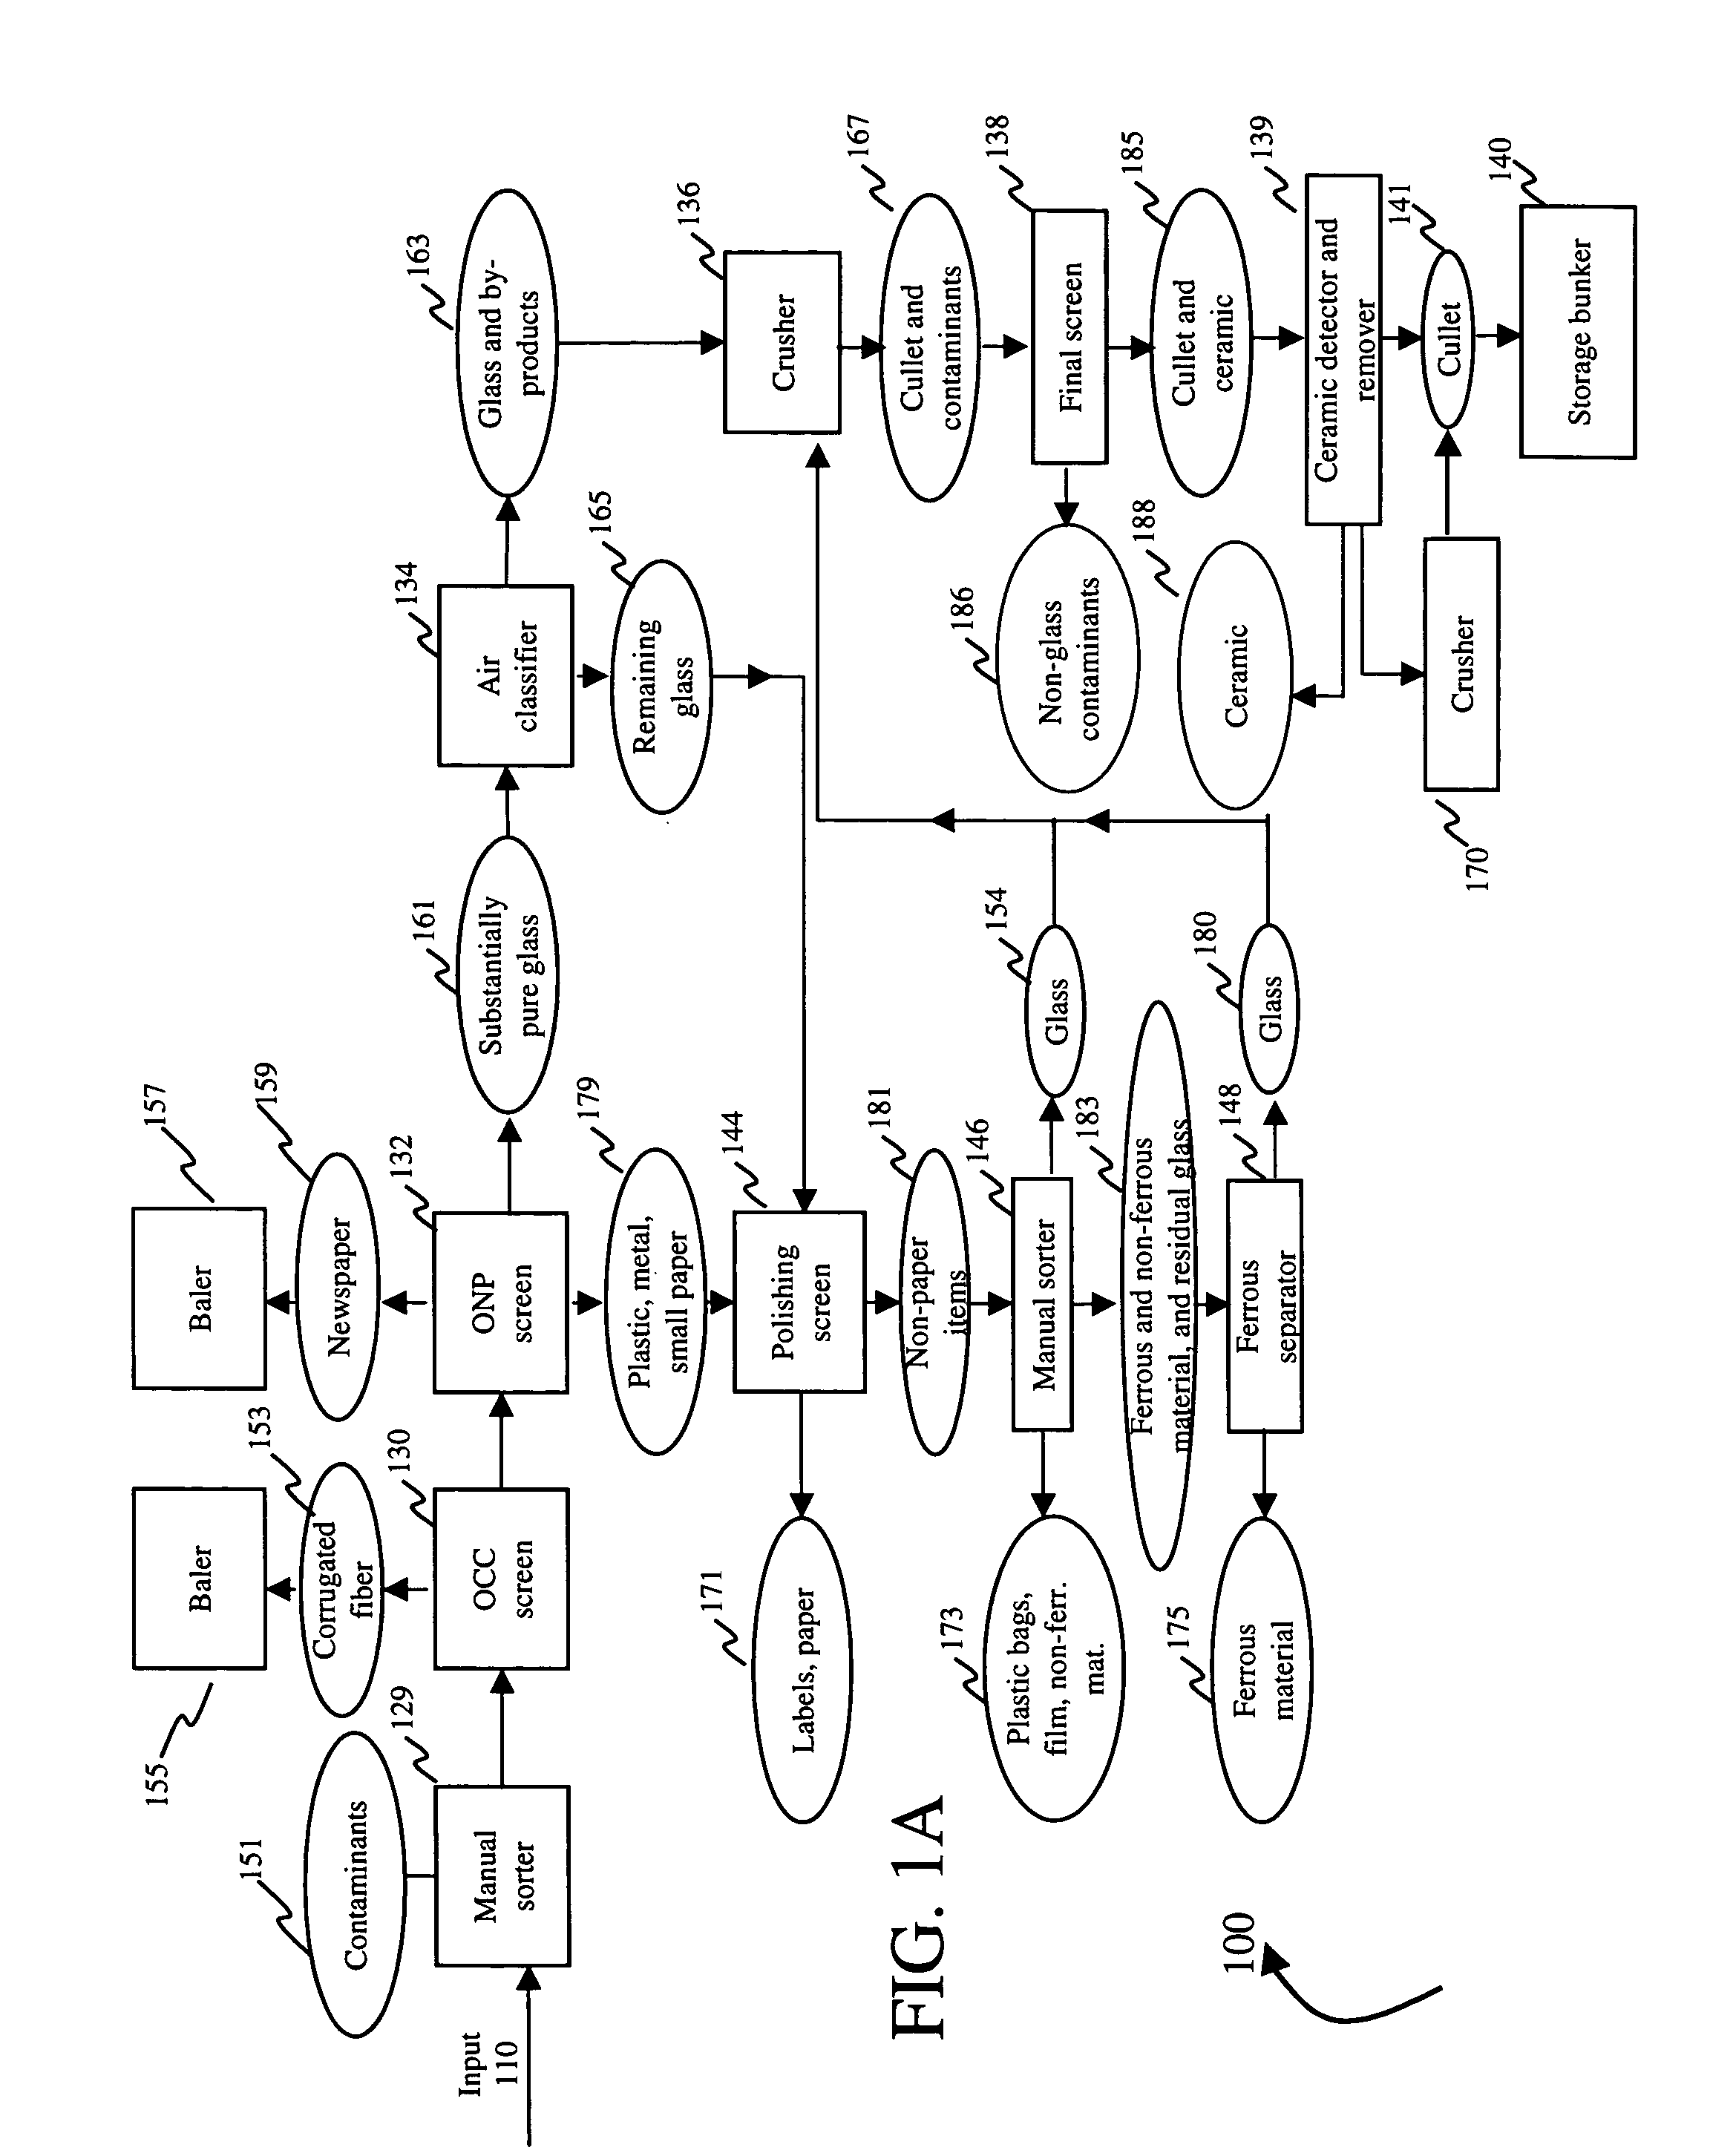 Systems and methods for sorting, collecting data pertaining to and certifying recyclables at a material recovery facility